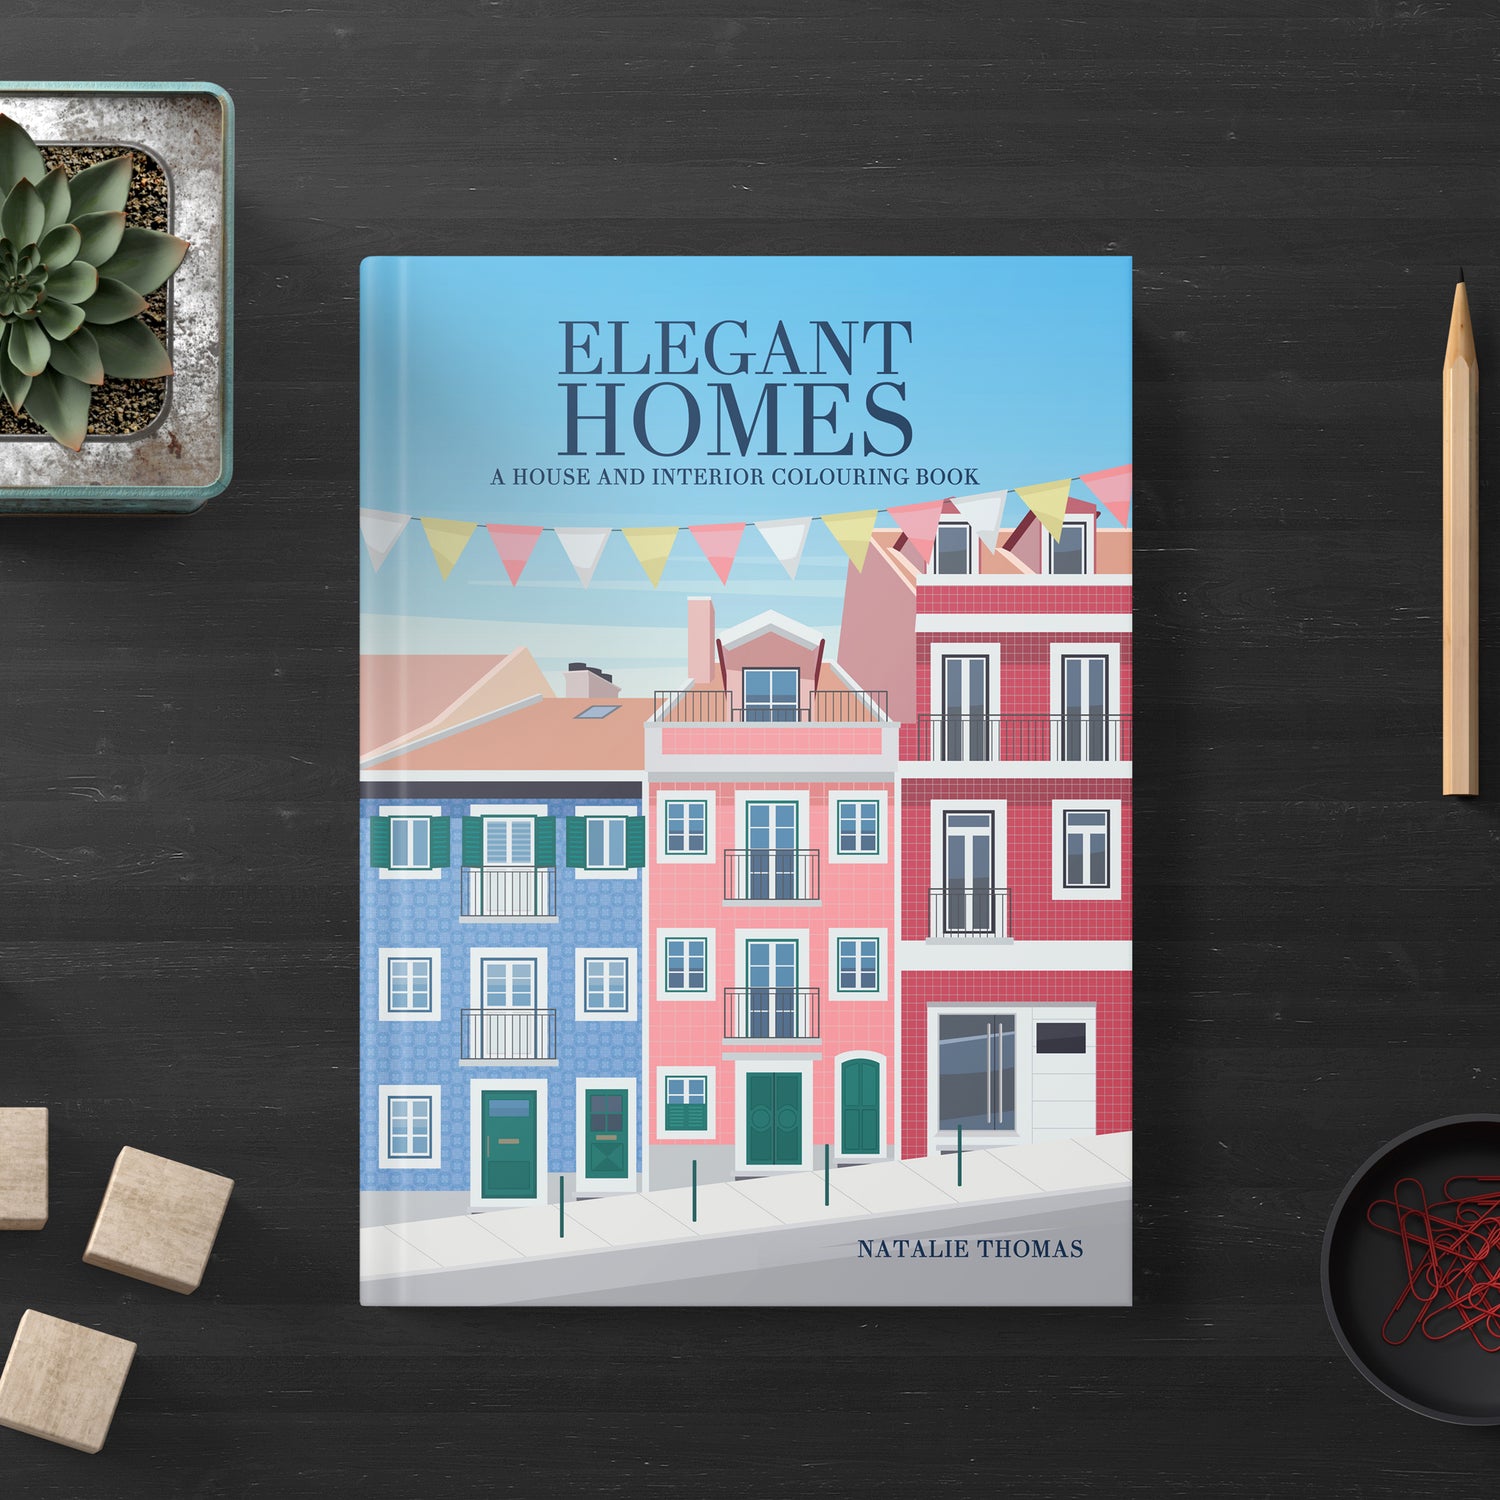 Elegant Homes: A House and Interior Colouring Book by Natalie Thomas